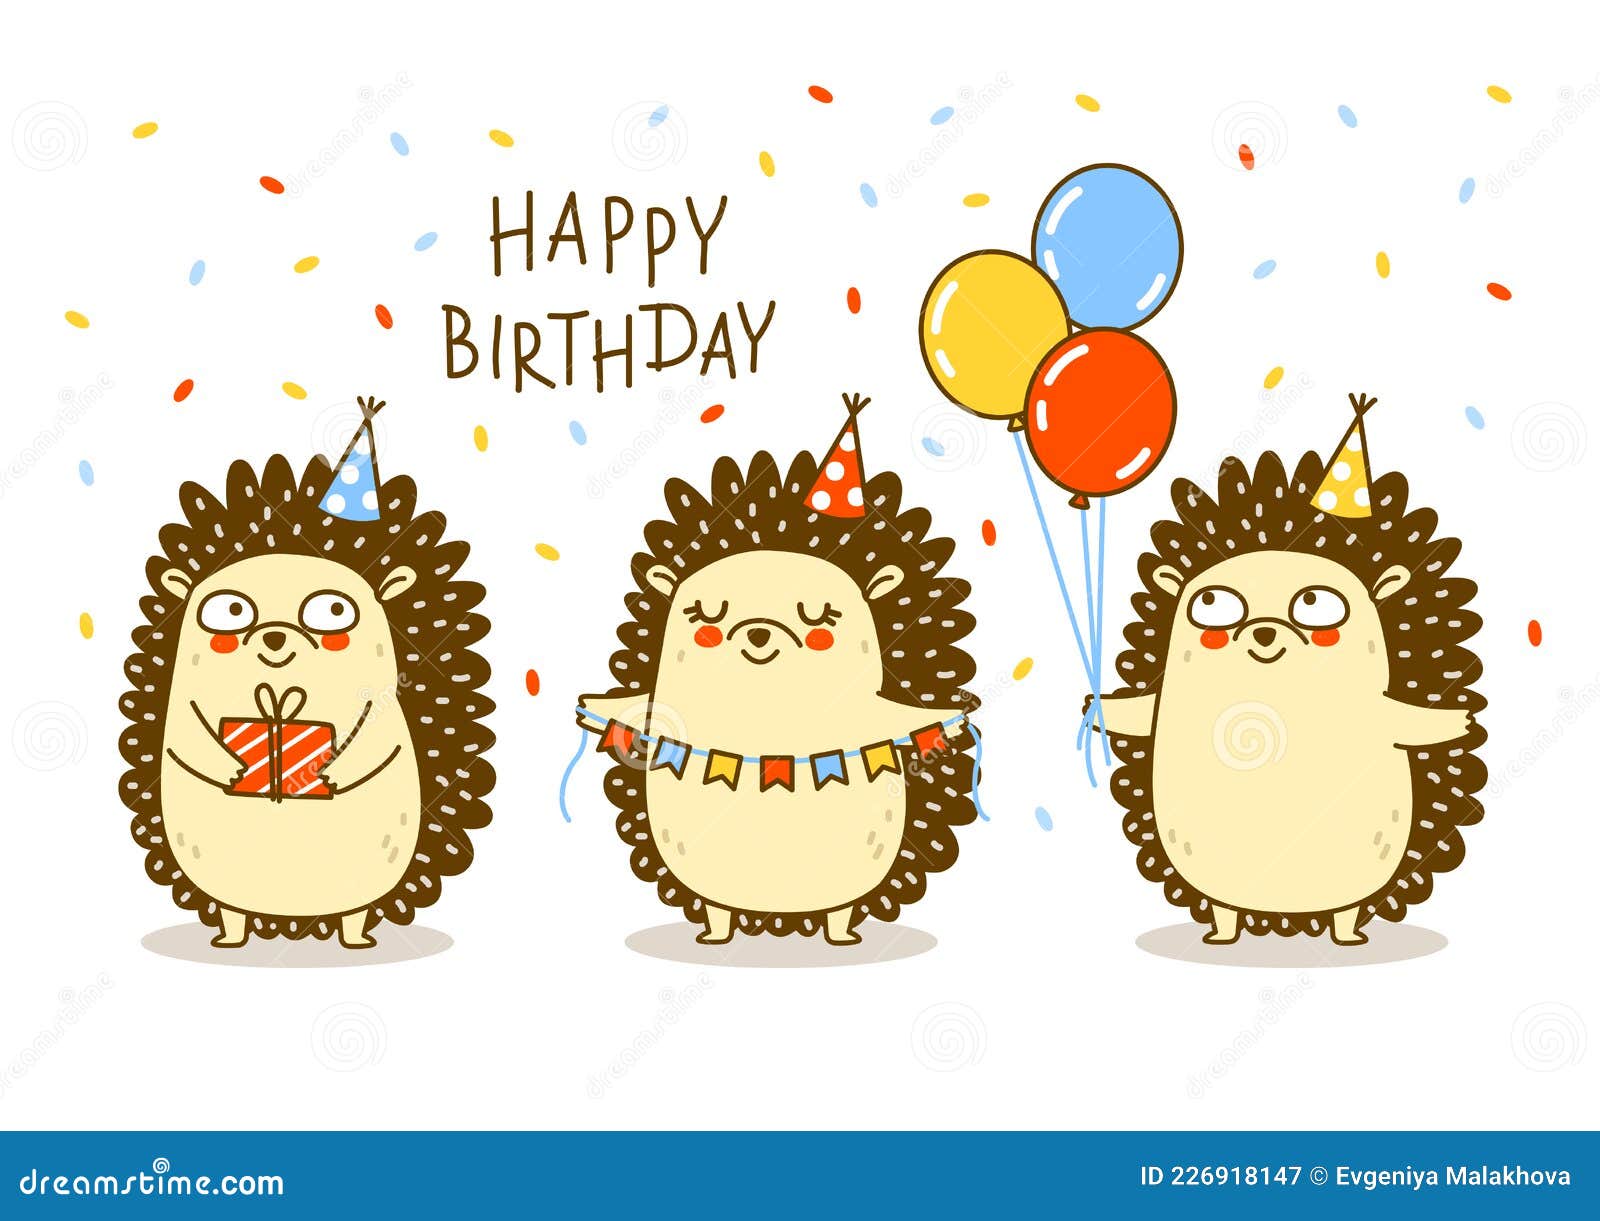 Cute Hedgehogs Border Solated on White - Cartoon Characters for Your Happy  Birthday Design Stock Vector - Illustration of cute, surprise: 226918147